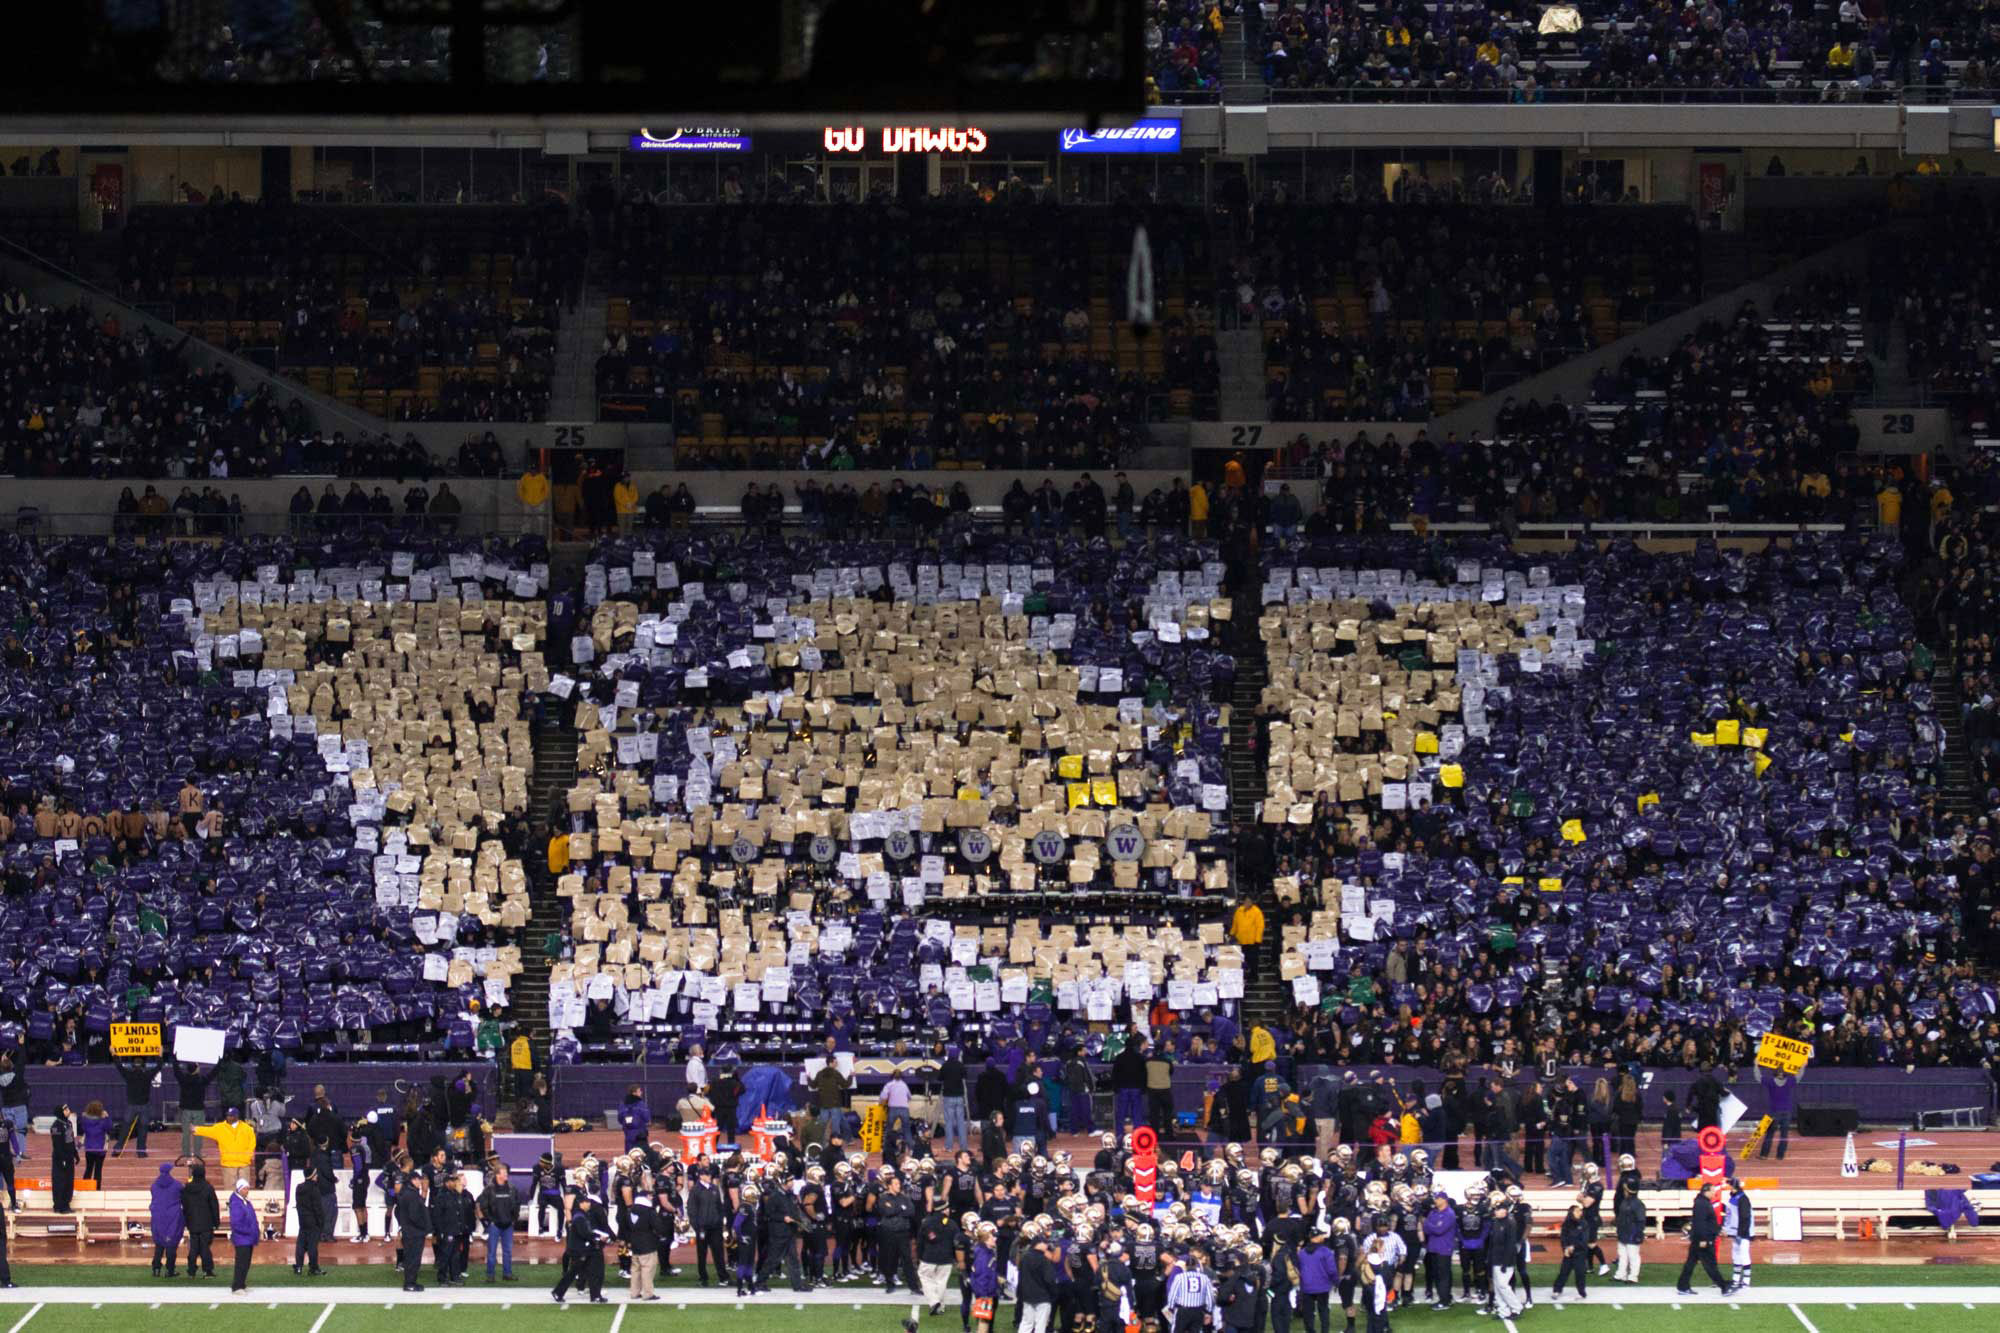 Fans holding individual purple and gold signs create a giant W in the football field stands